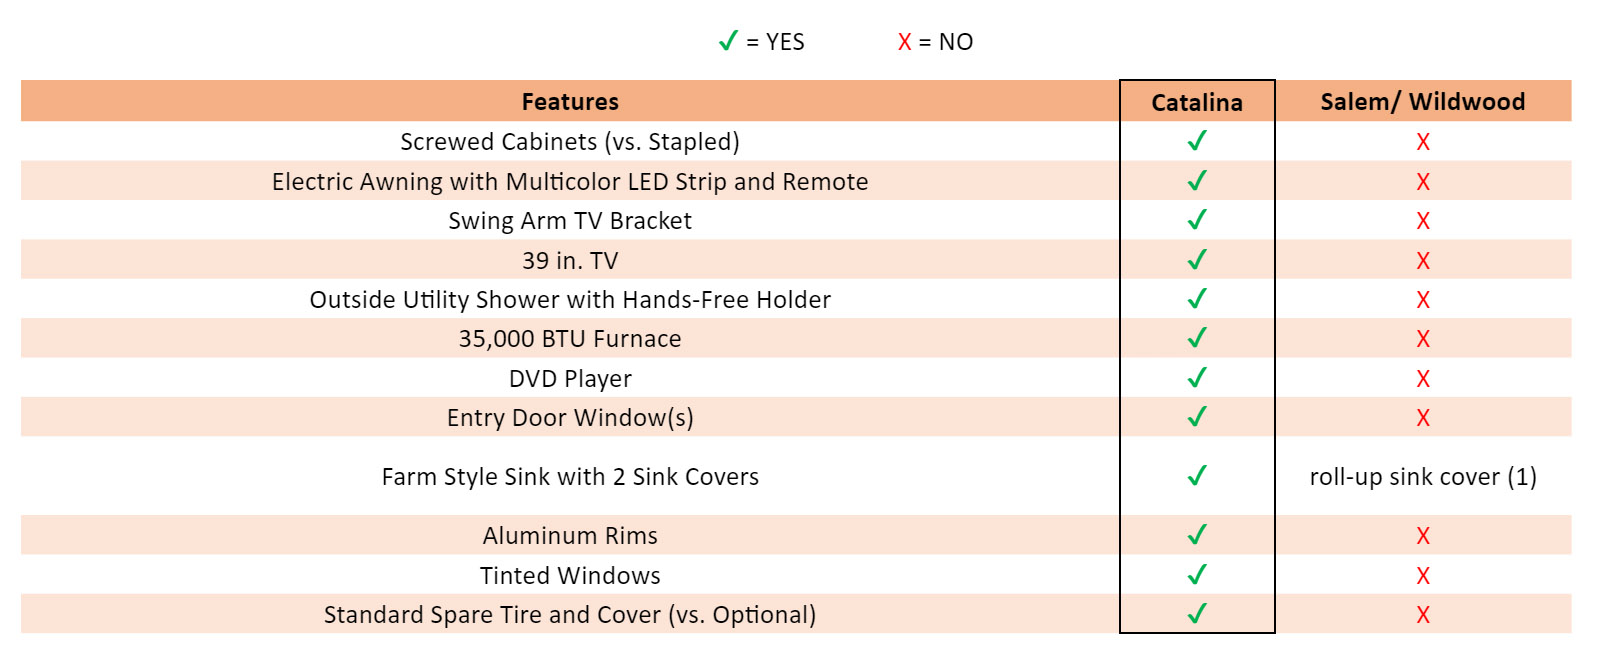 Comparison Table Showing Catalina has better features